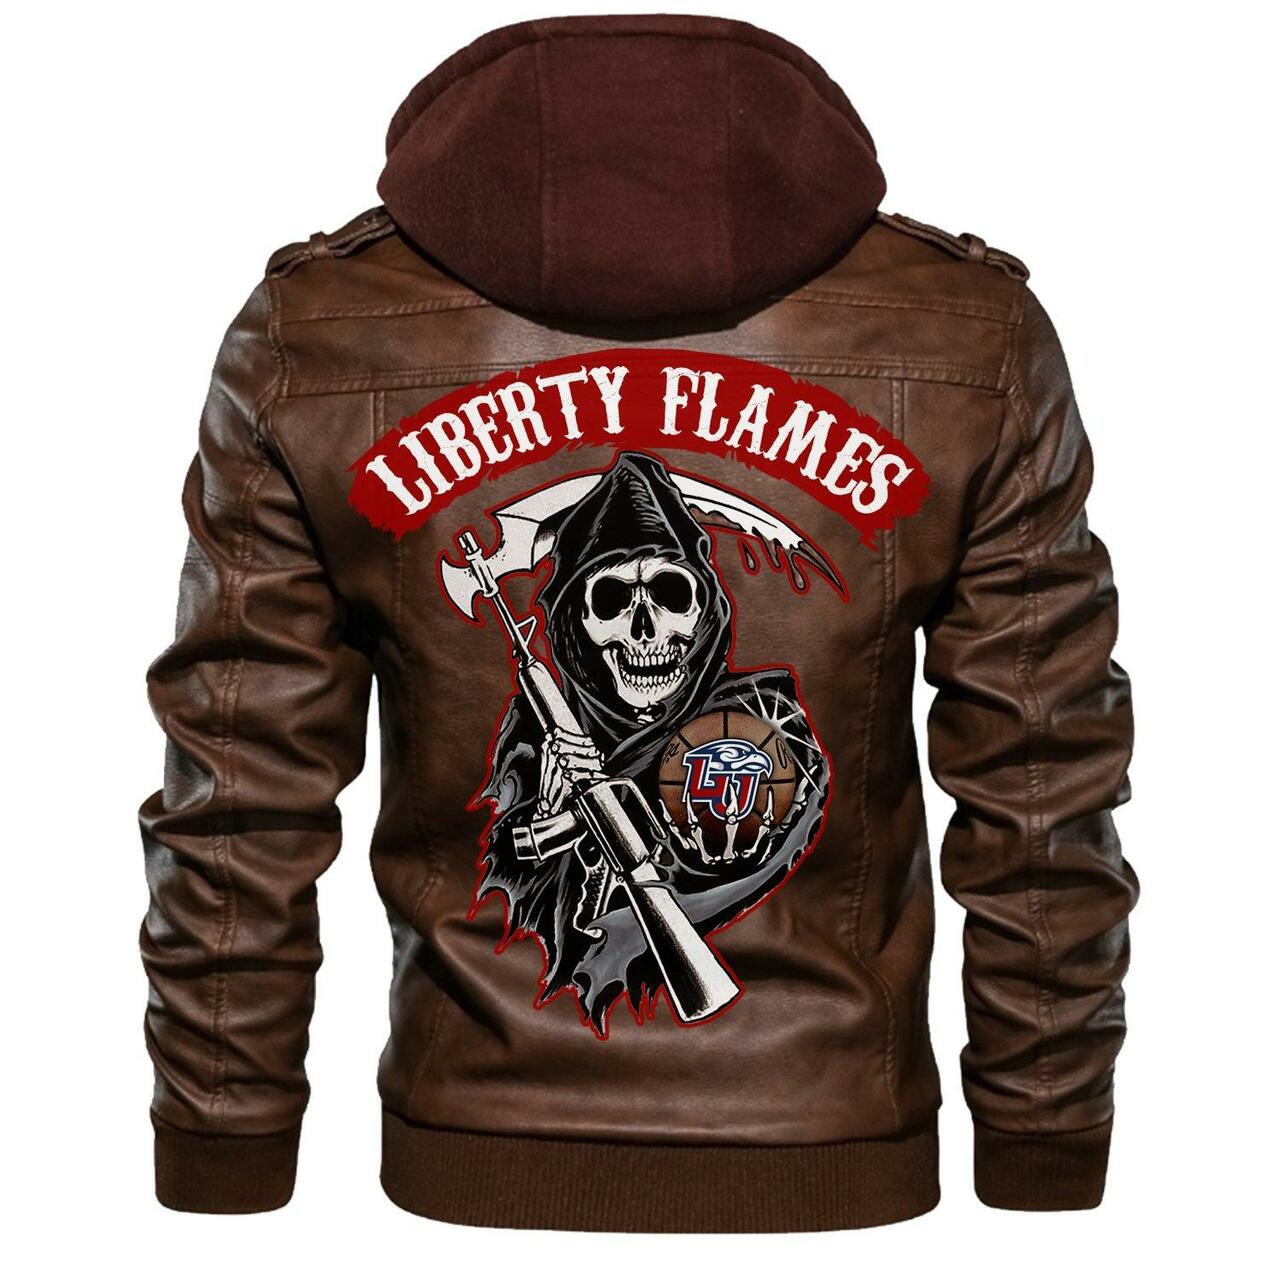 You can find a good leather jacket by access our website 85